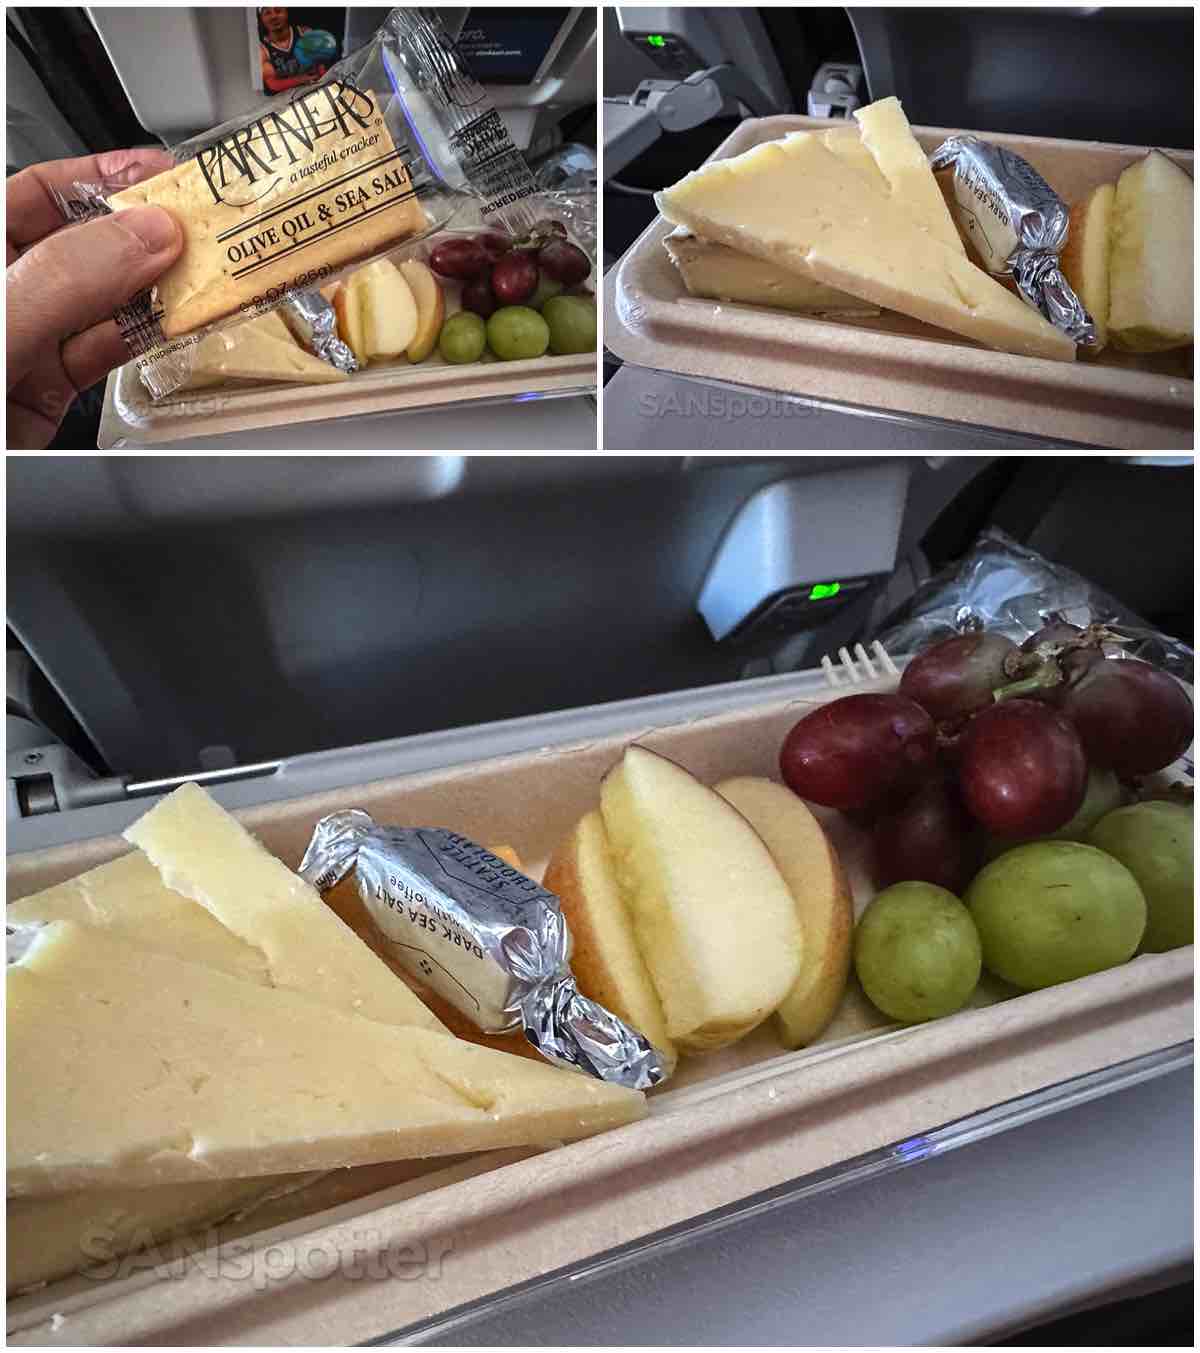 Alaska Airlines Signature Fruit and Cheese Platter contents